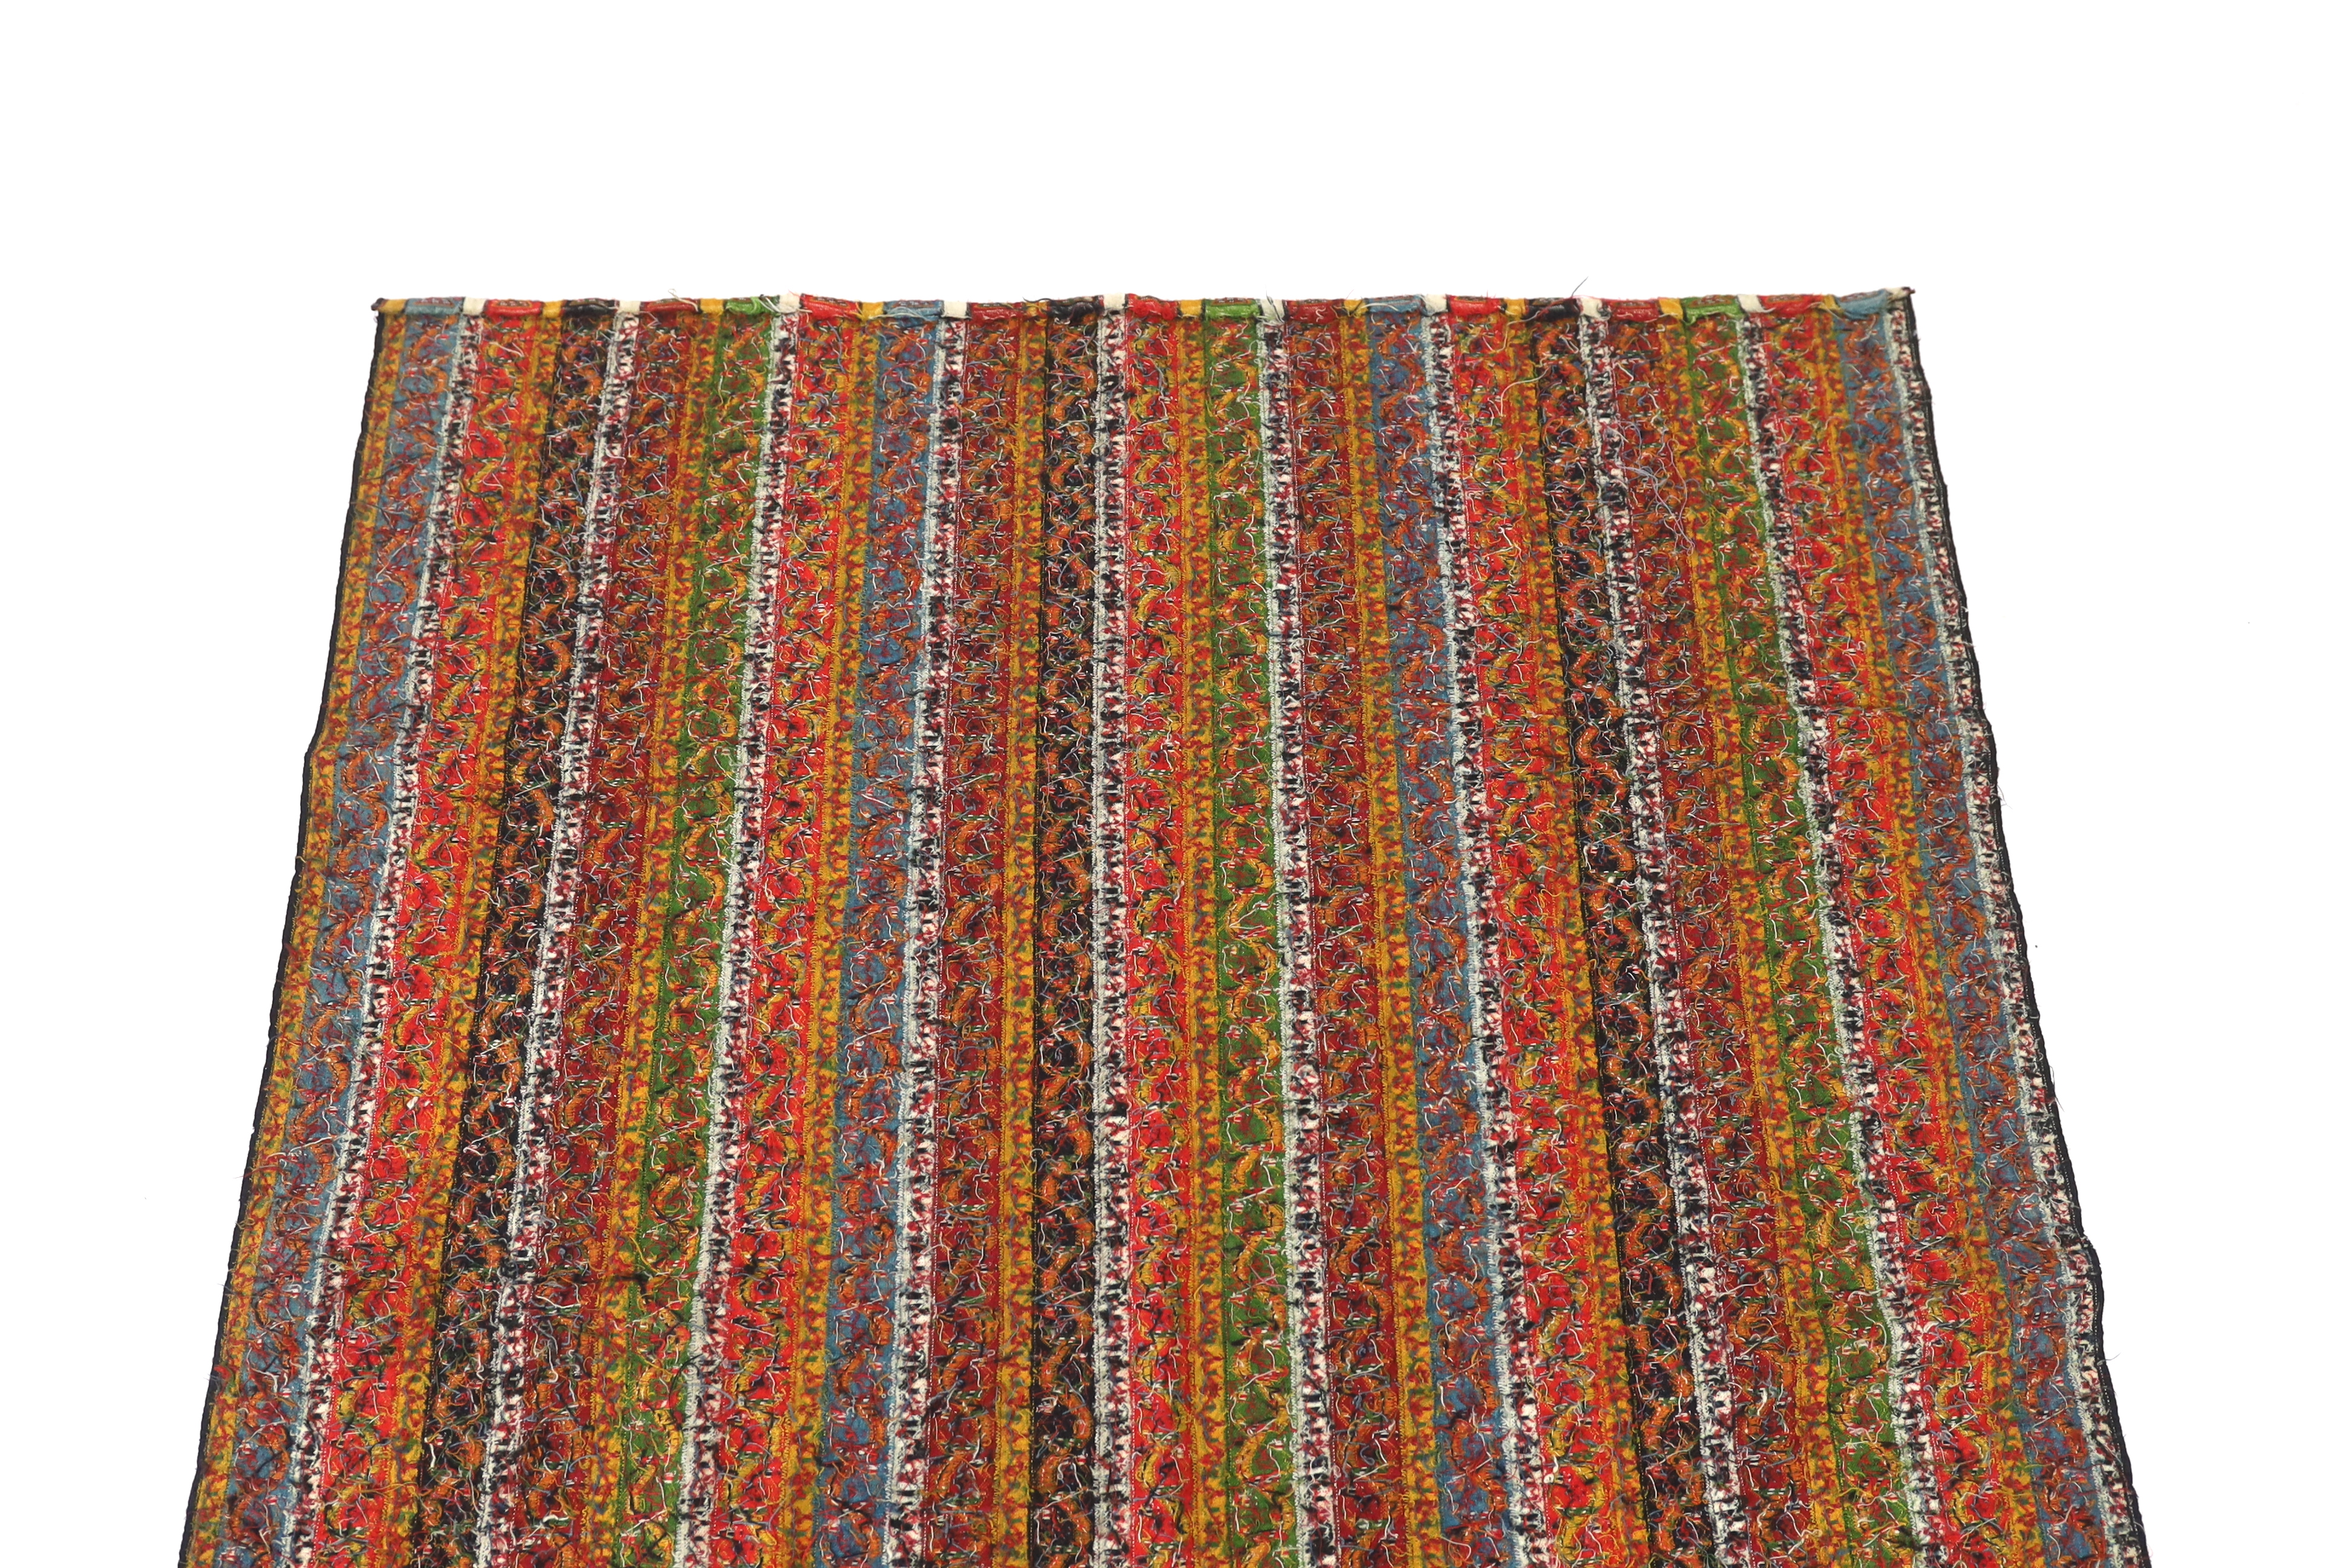 A 19th century Kashmir, multi coloured, striped twill, woven wool shawl, with the fringe cut one end, 140cm long x 114cm wide